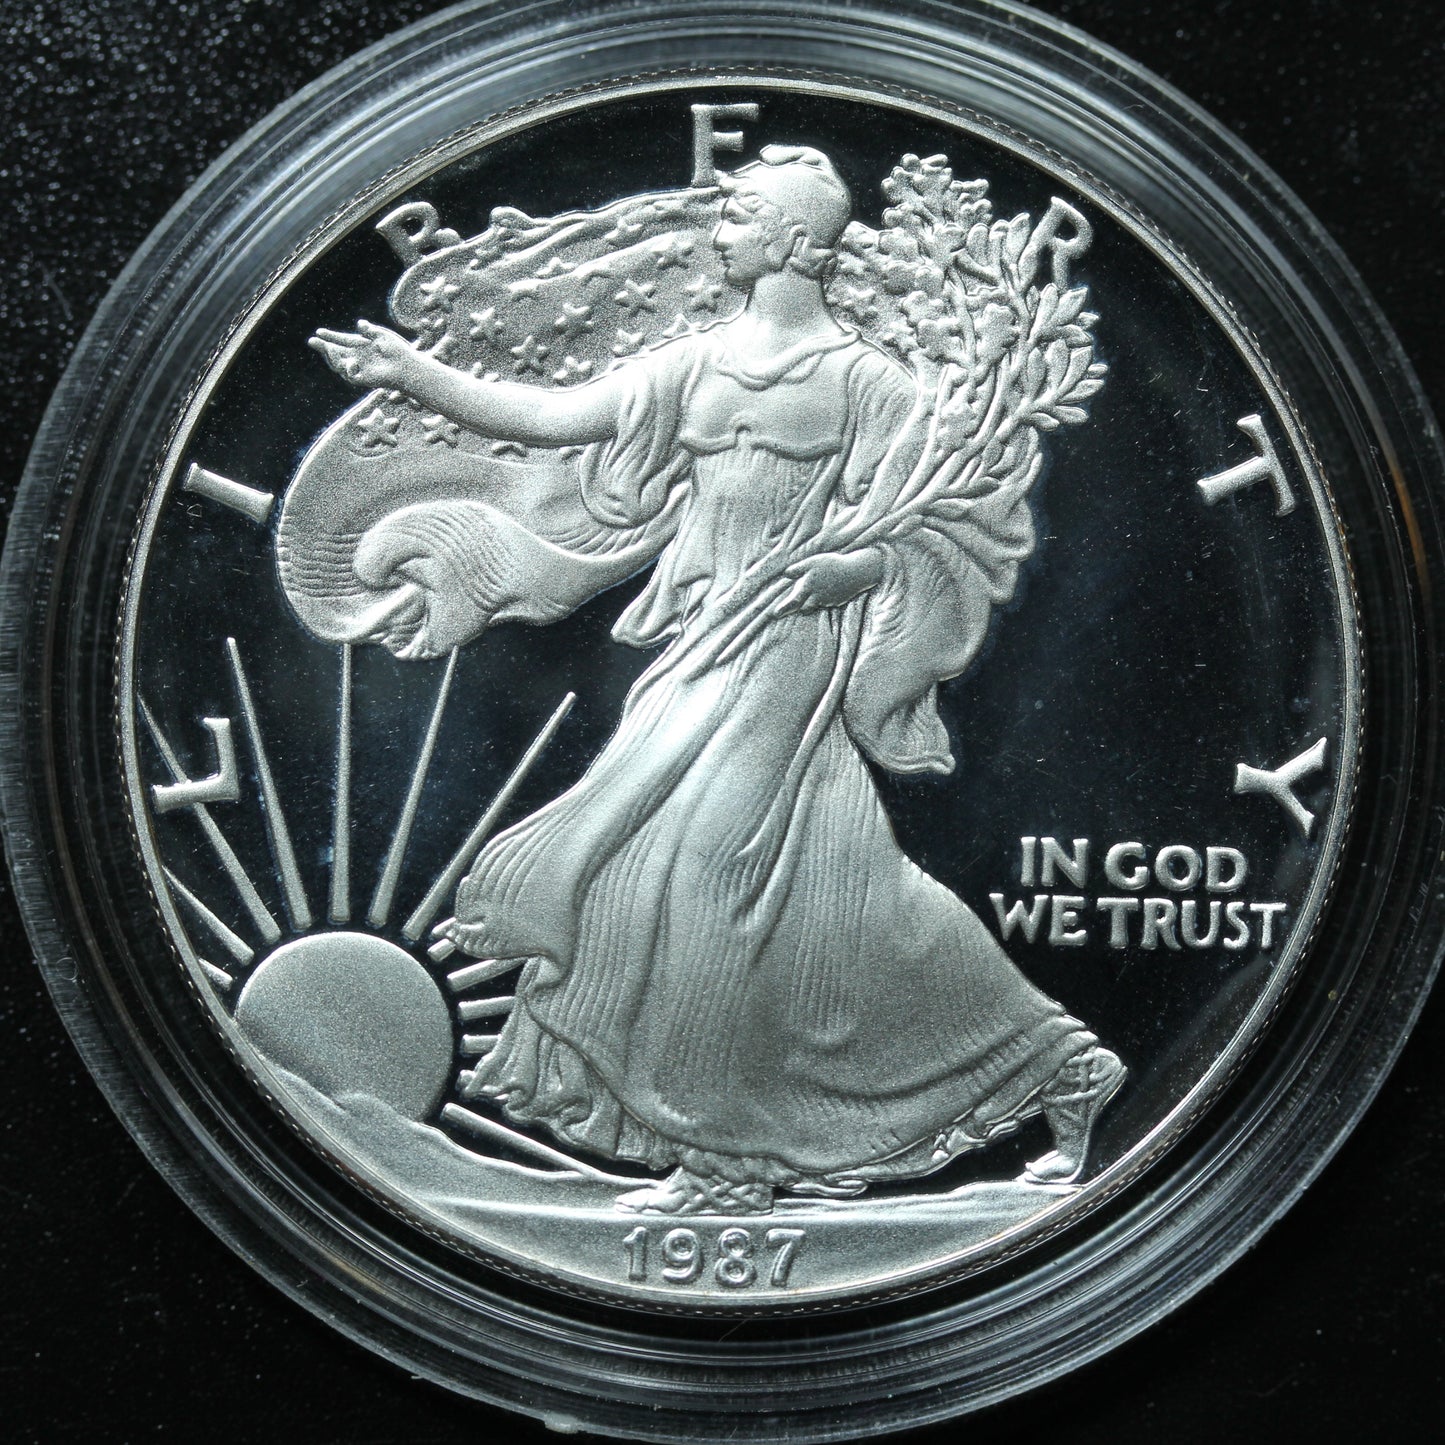 1987 S Proof Silver American Eagle 1 oz Coin Only w/ Capsule